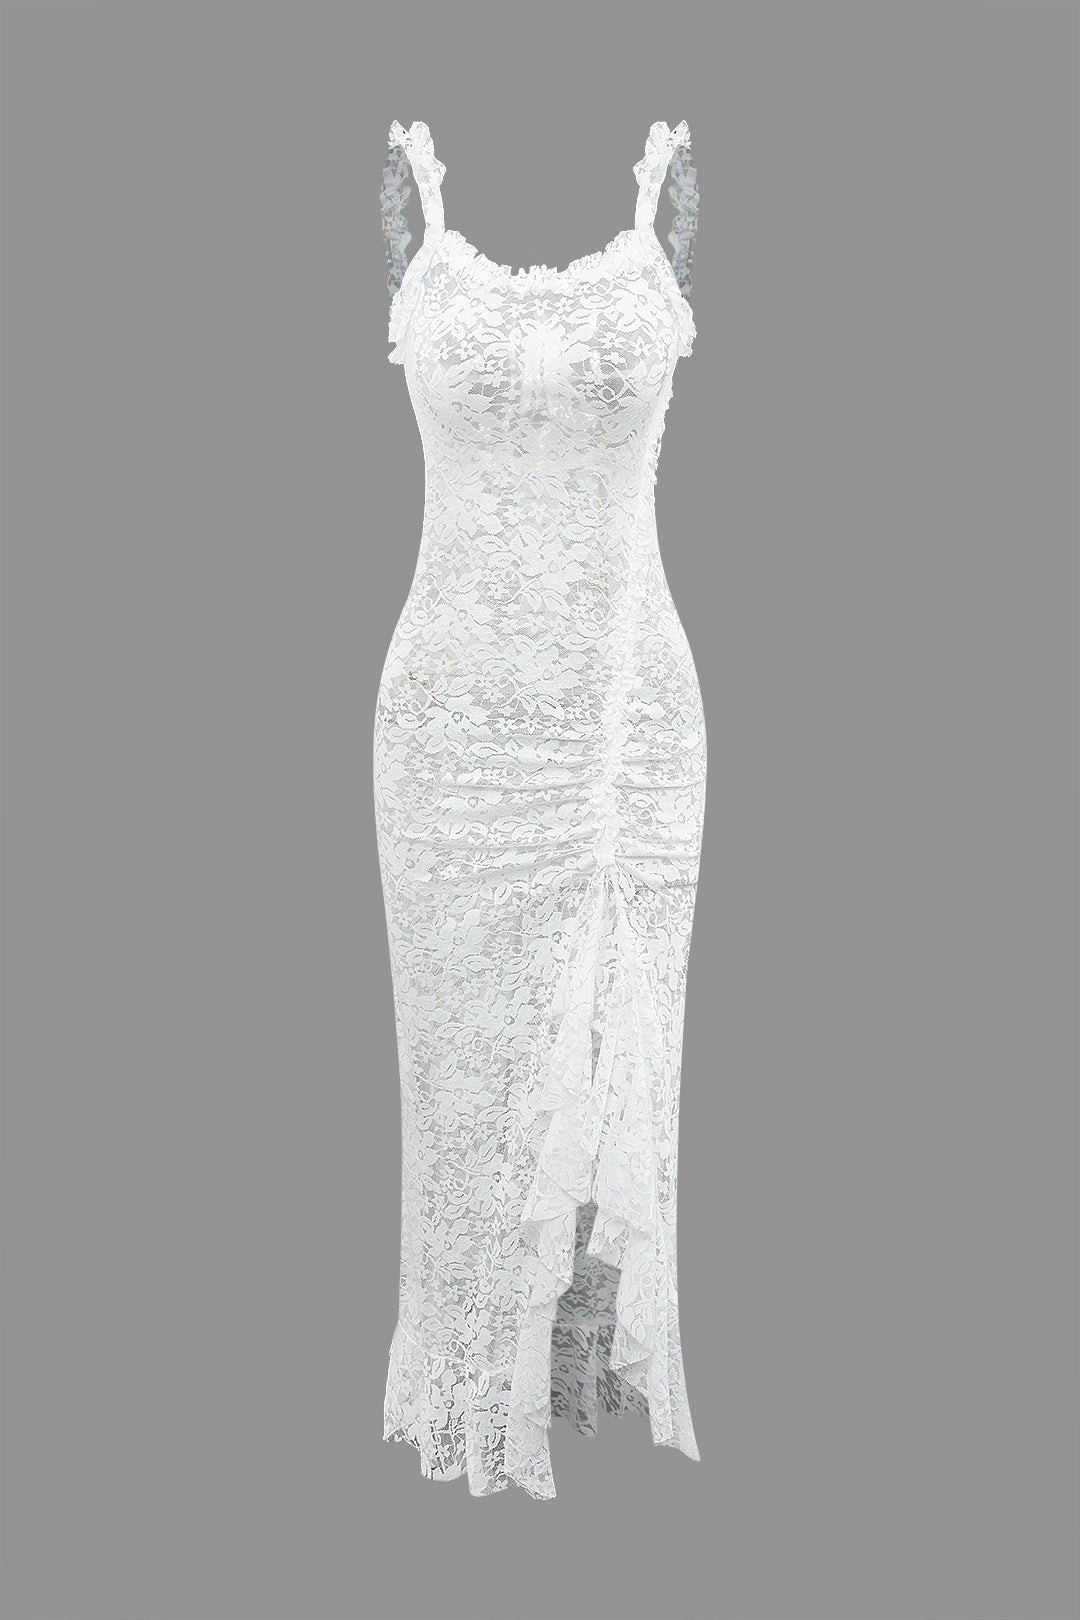 White Dresses | Shop White Dresses For Any Occasions | MICAS